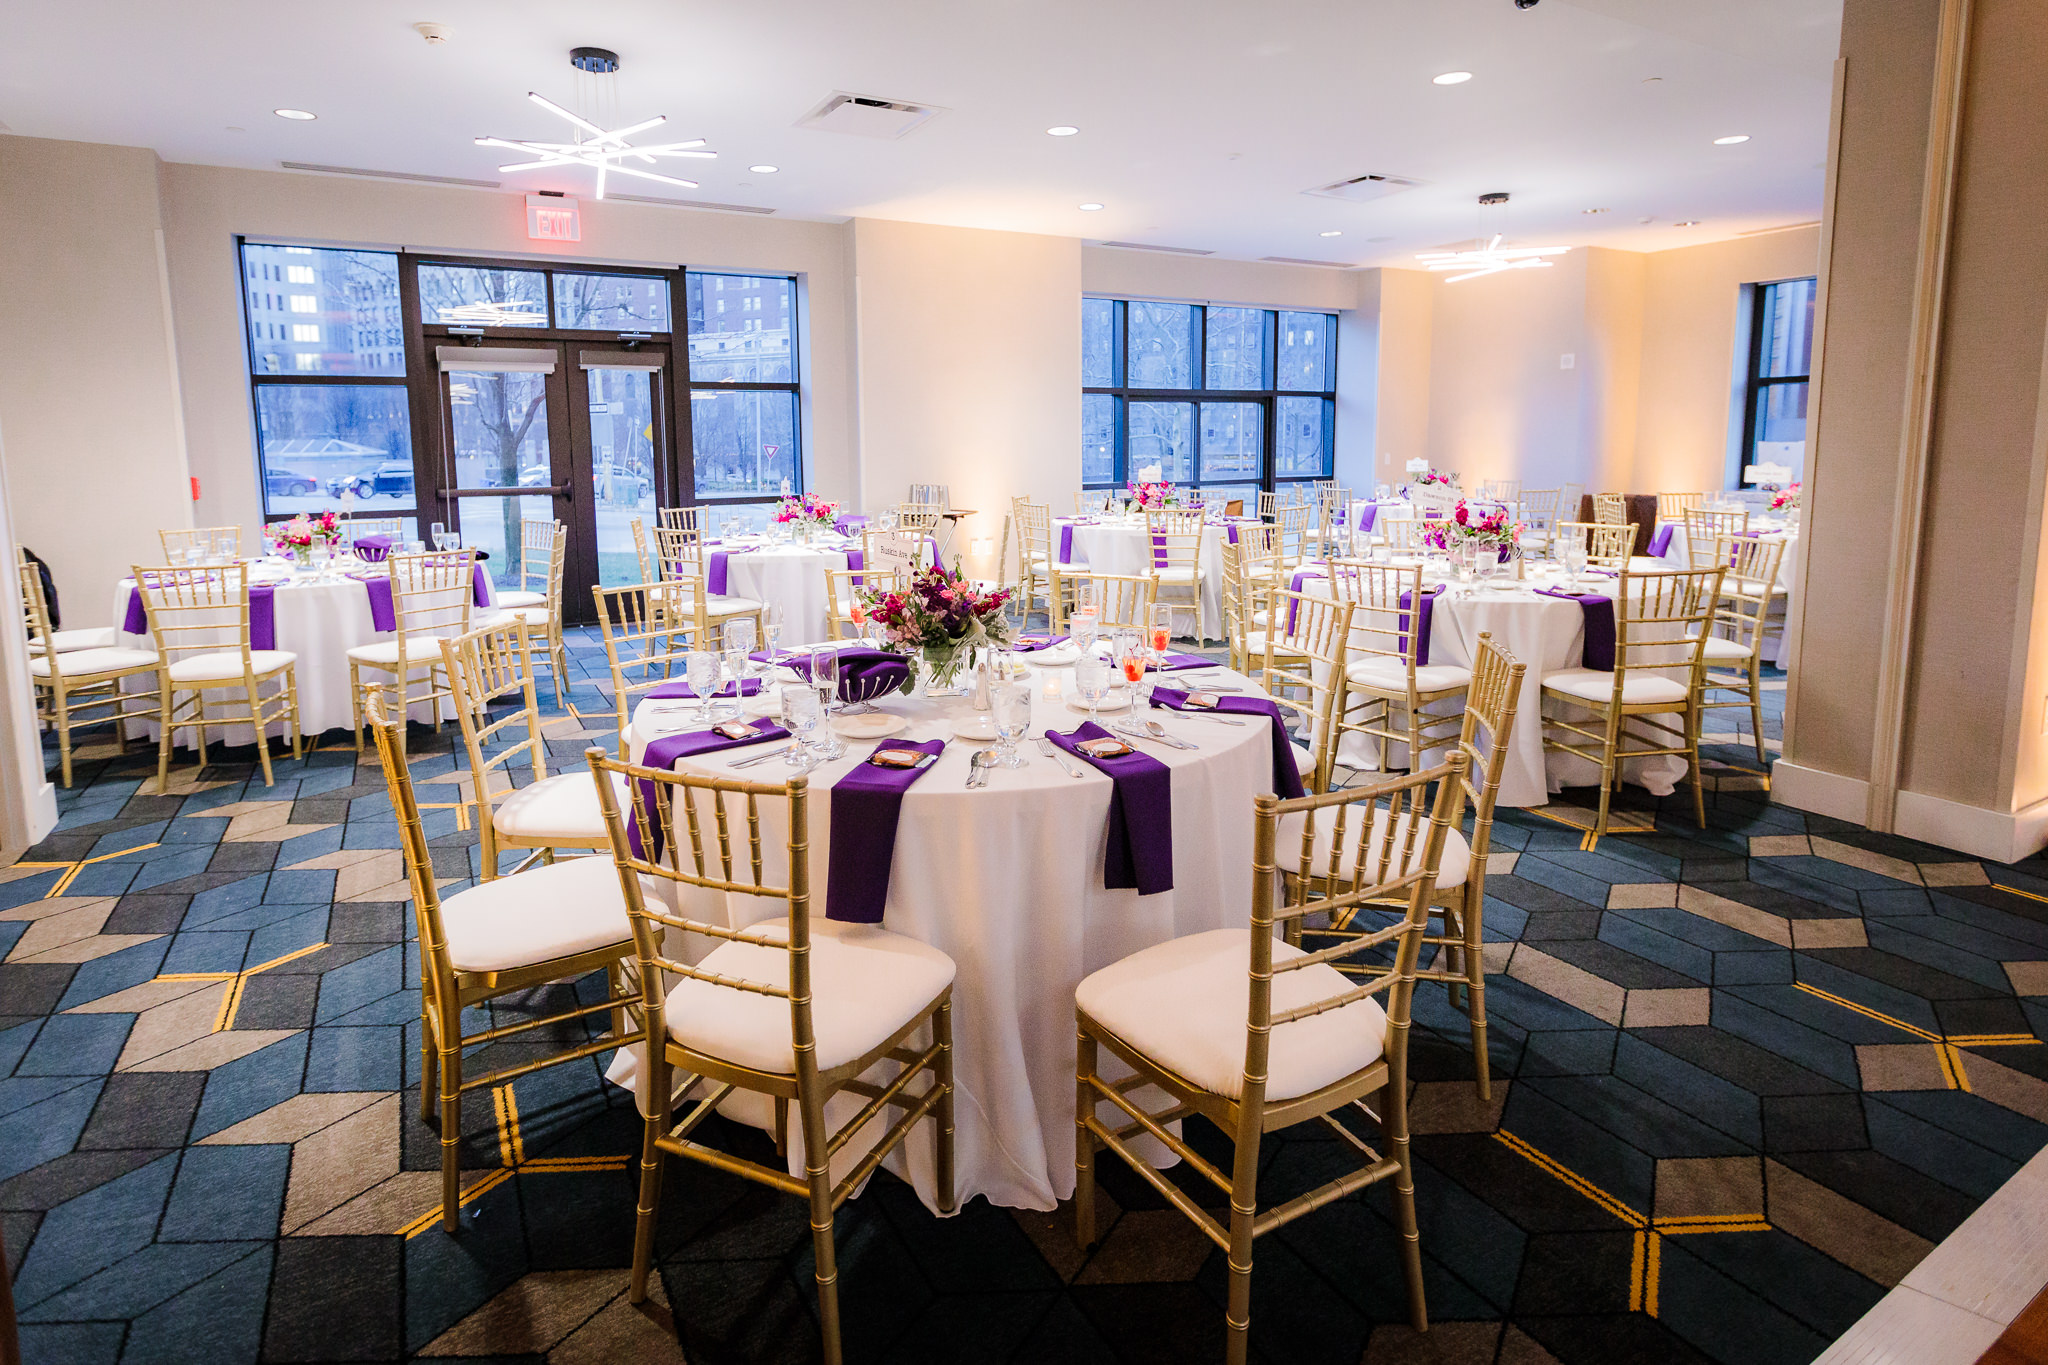 The Monongahela room at DoubleTree Pittsburgh Downtown set up for a wedding reception